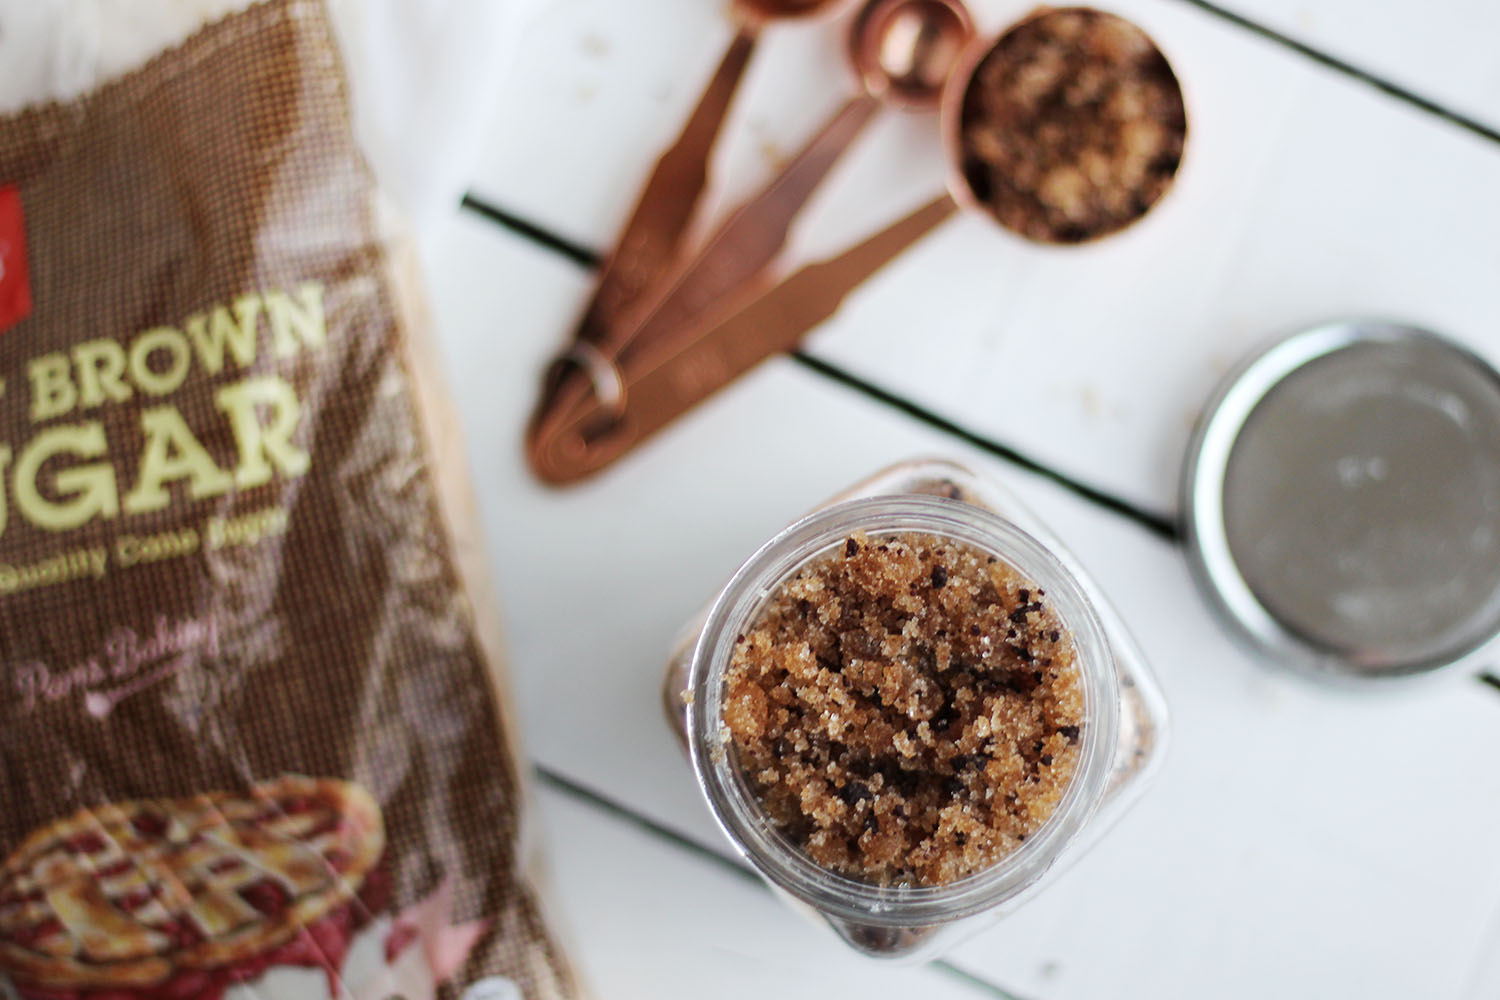 Coffe Sugar Scrub - a great diy gift or body scrub for yourself. Super for cellulite and stretch marks!